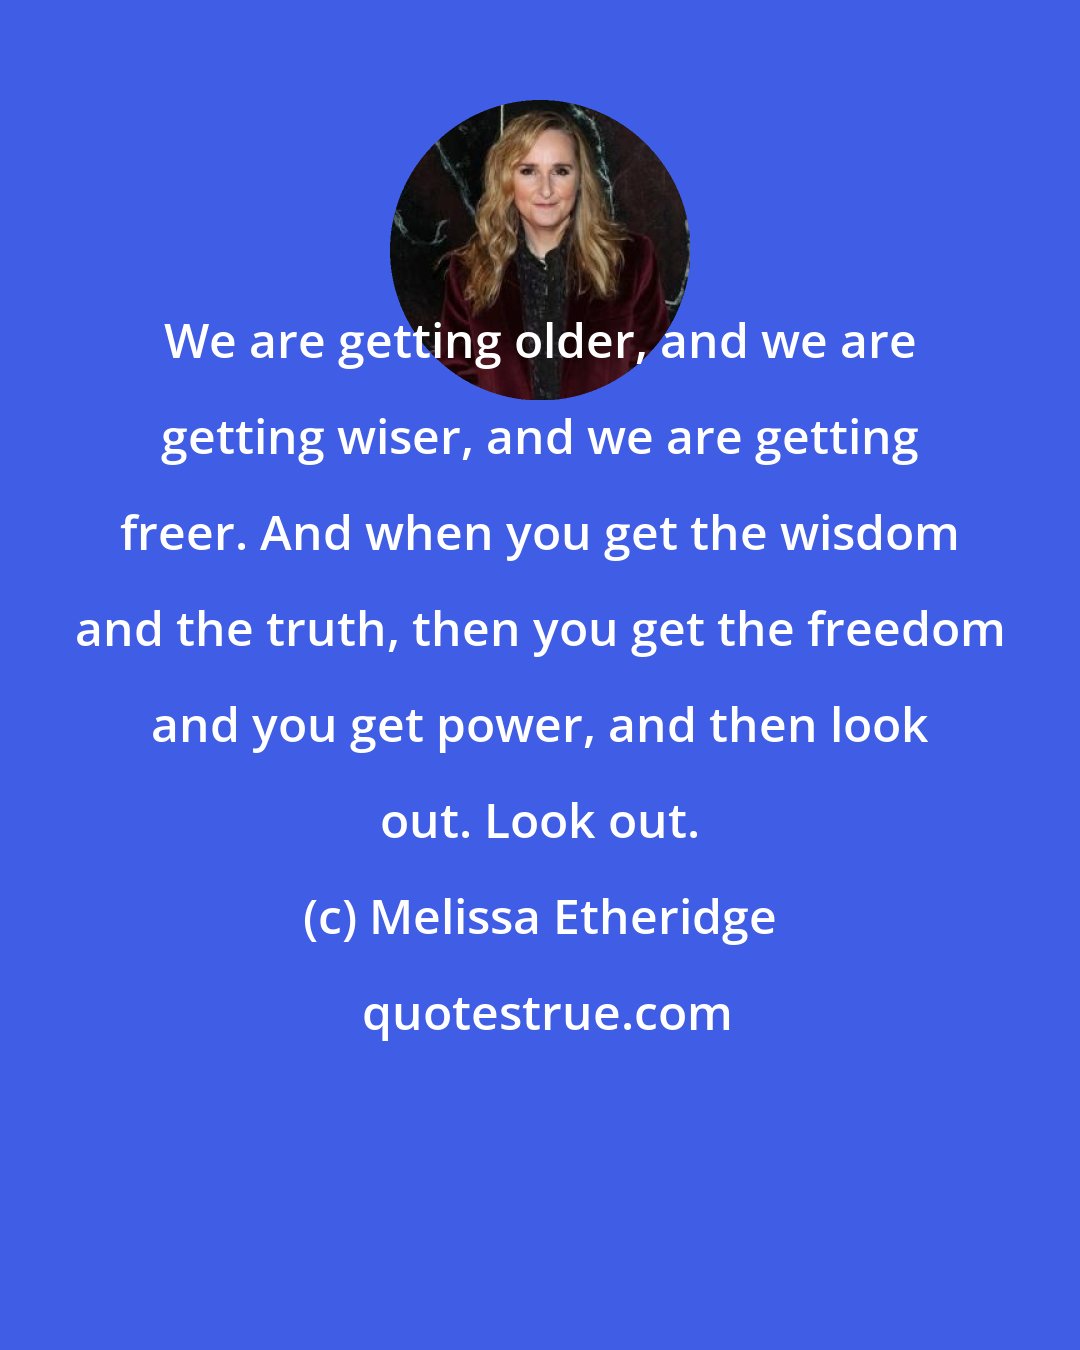 Melissa Etheridge: We are getting older, and we are getting wiser, and we are getting freer. And when you get the wisdom and the truth, then you get the freedom and you get power, and then look out. Look out.